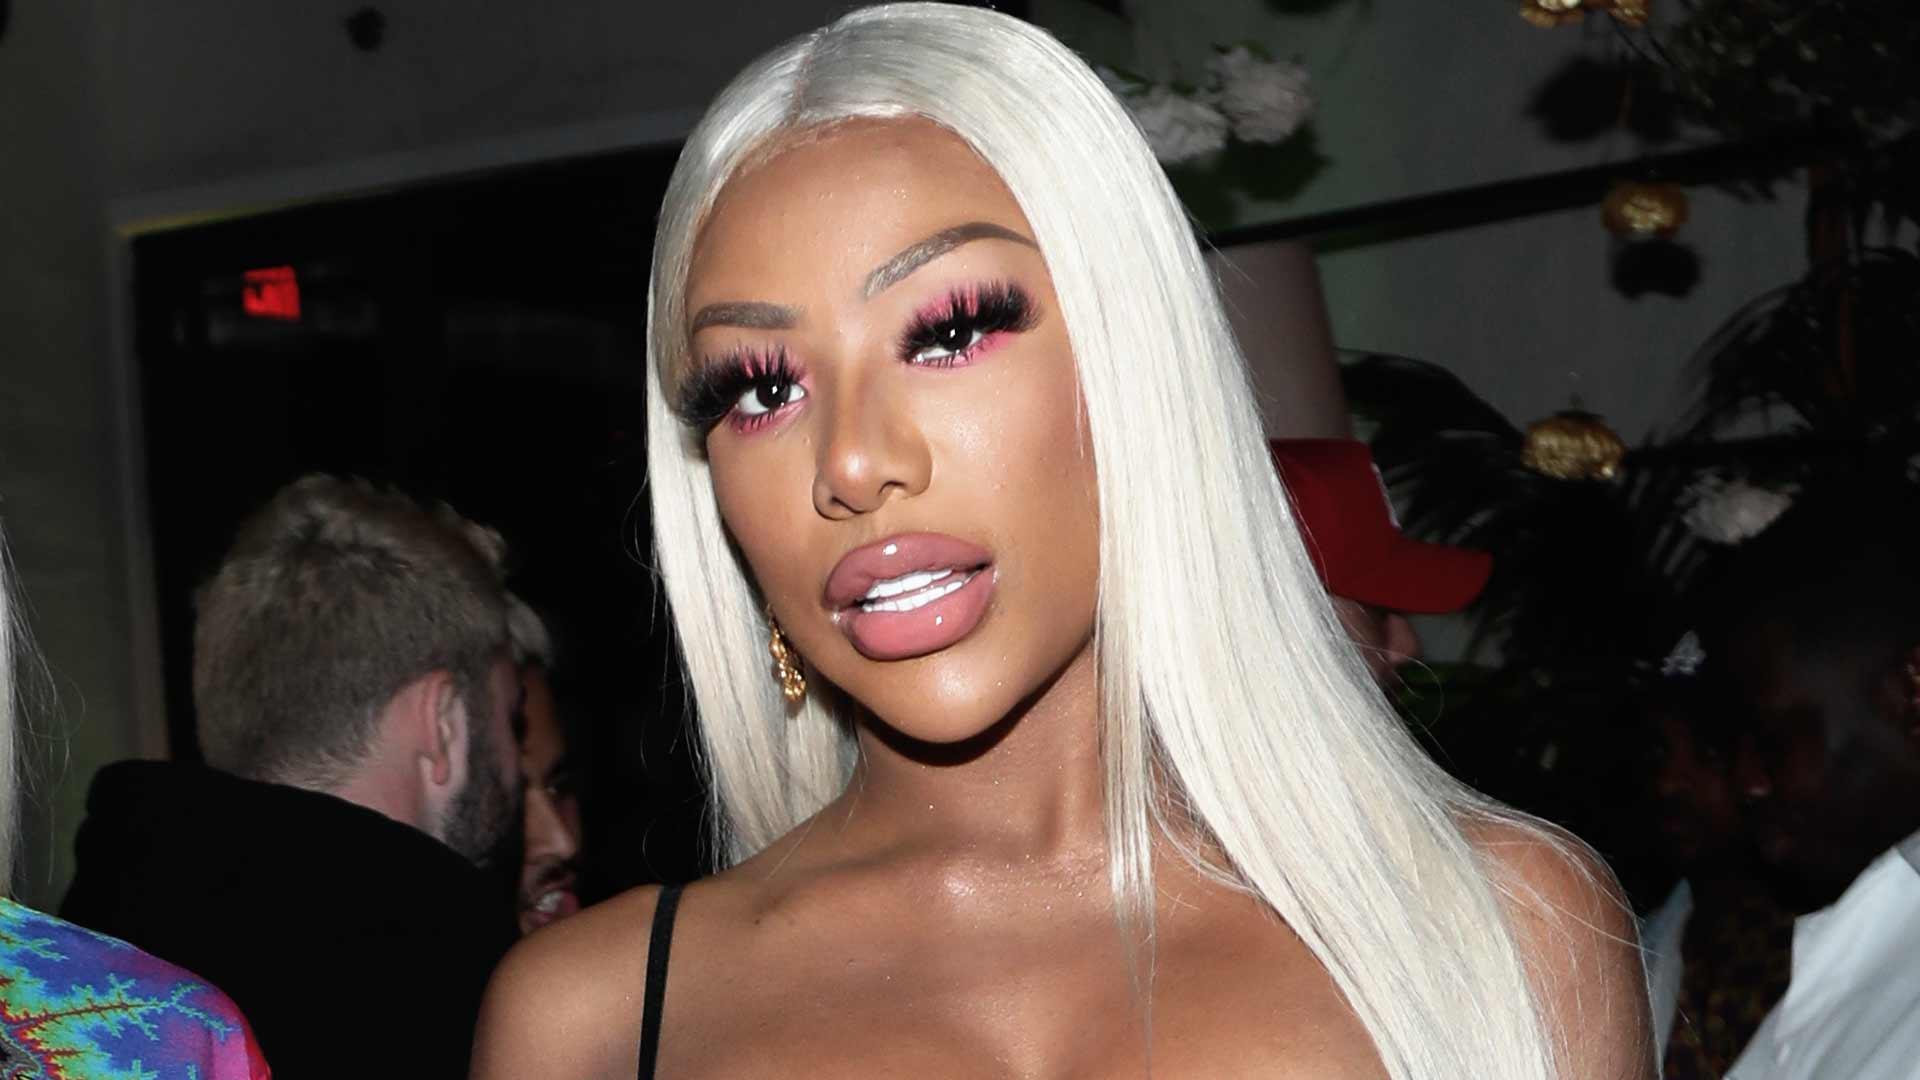 Yeezy Model Shannade Clermont Files Letters of Support to Avoid Prison, Hypes Charitable Behavior